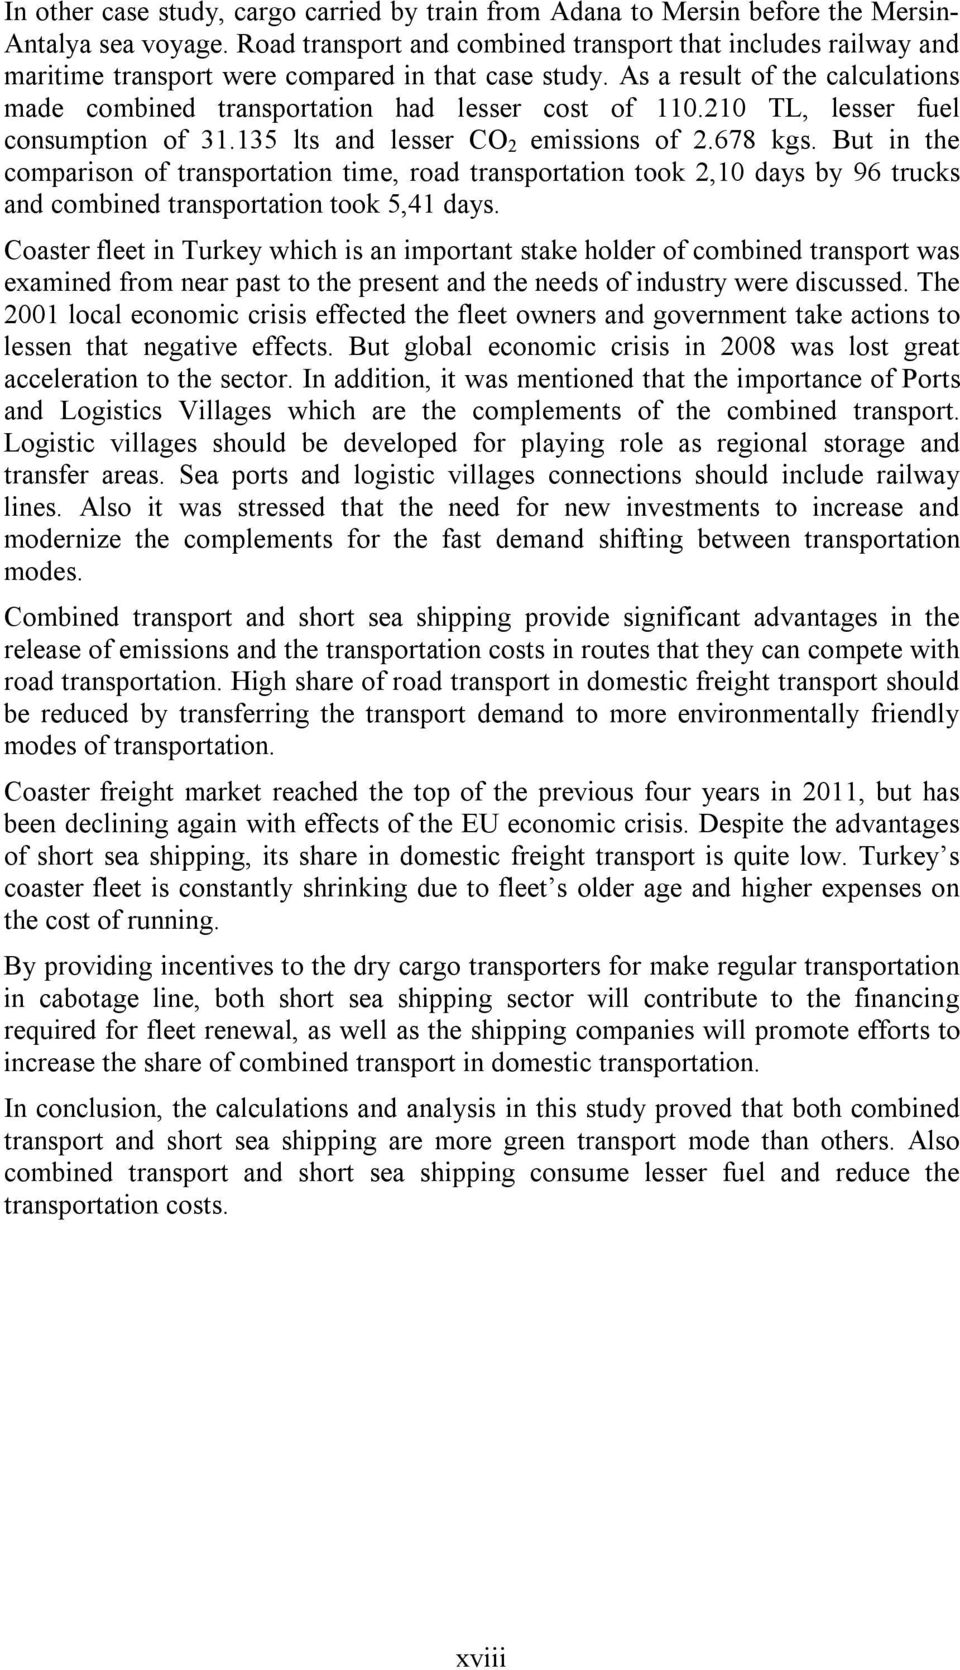 As a result of the calculations made combined transportation had lesser cost of 110.210 TL, lesser fuel consumption of 31.135 lts and lesser CO 2 emissions of 2.678 kgs.